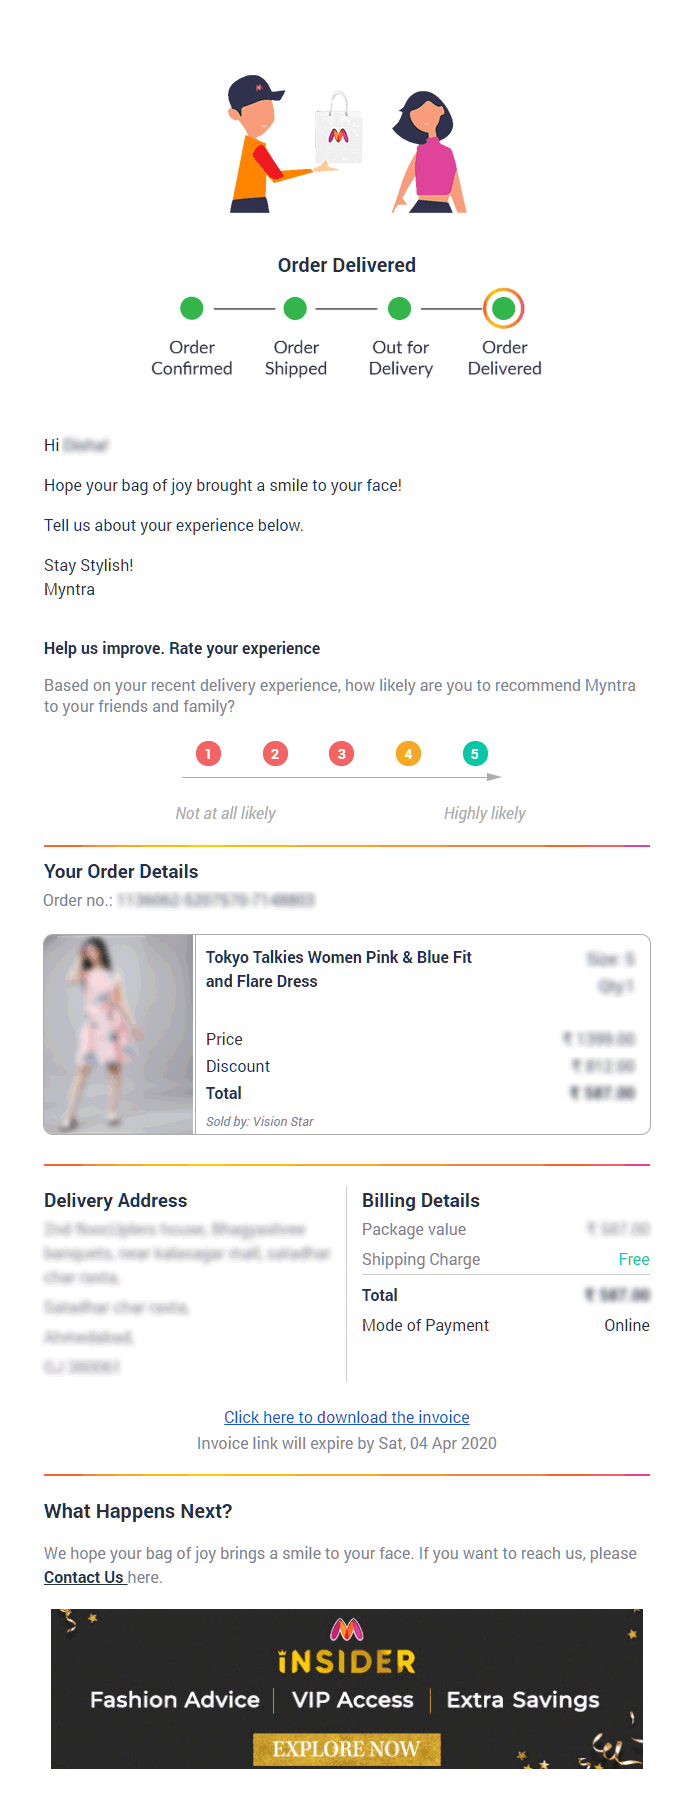 Myntra Delivered Notification Apparel and Accessories Email Template 